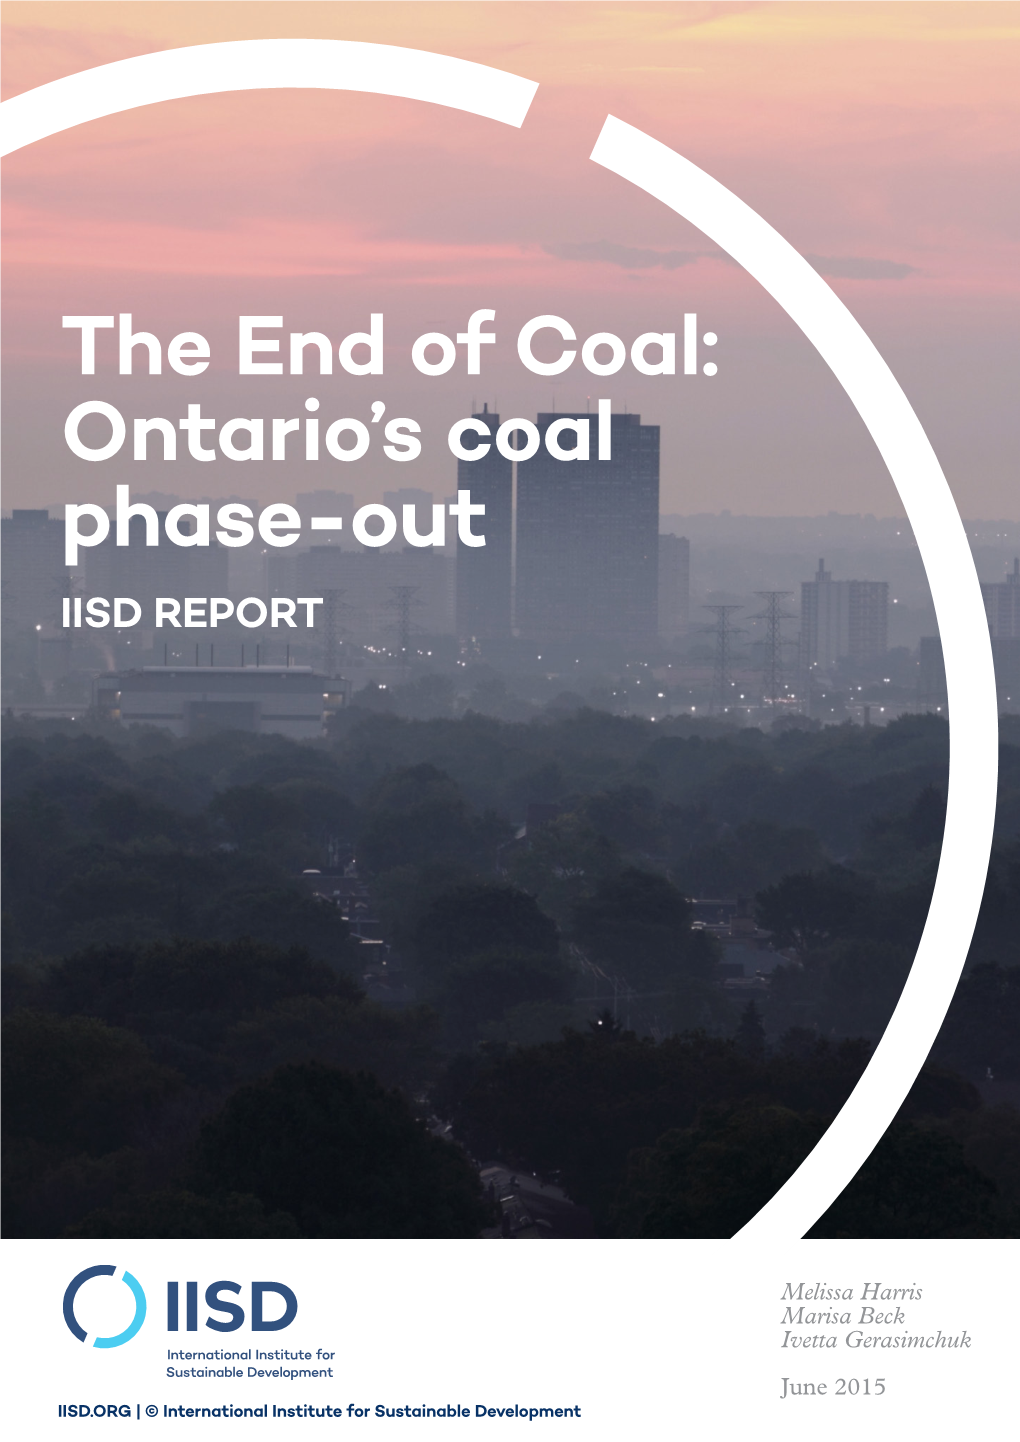 The End of Coal: Ontario's Coal Phase-Out